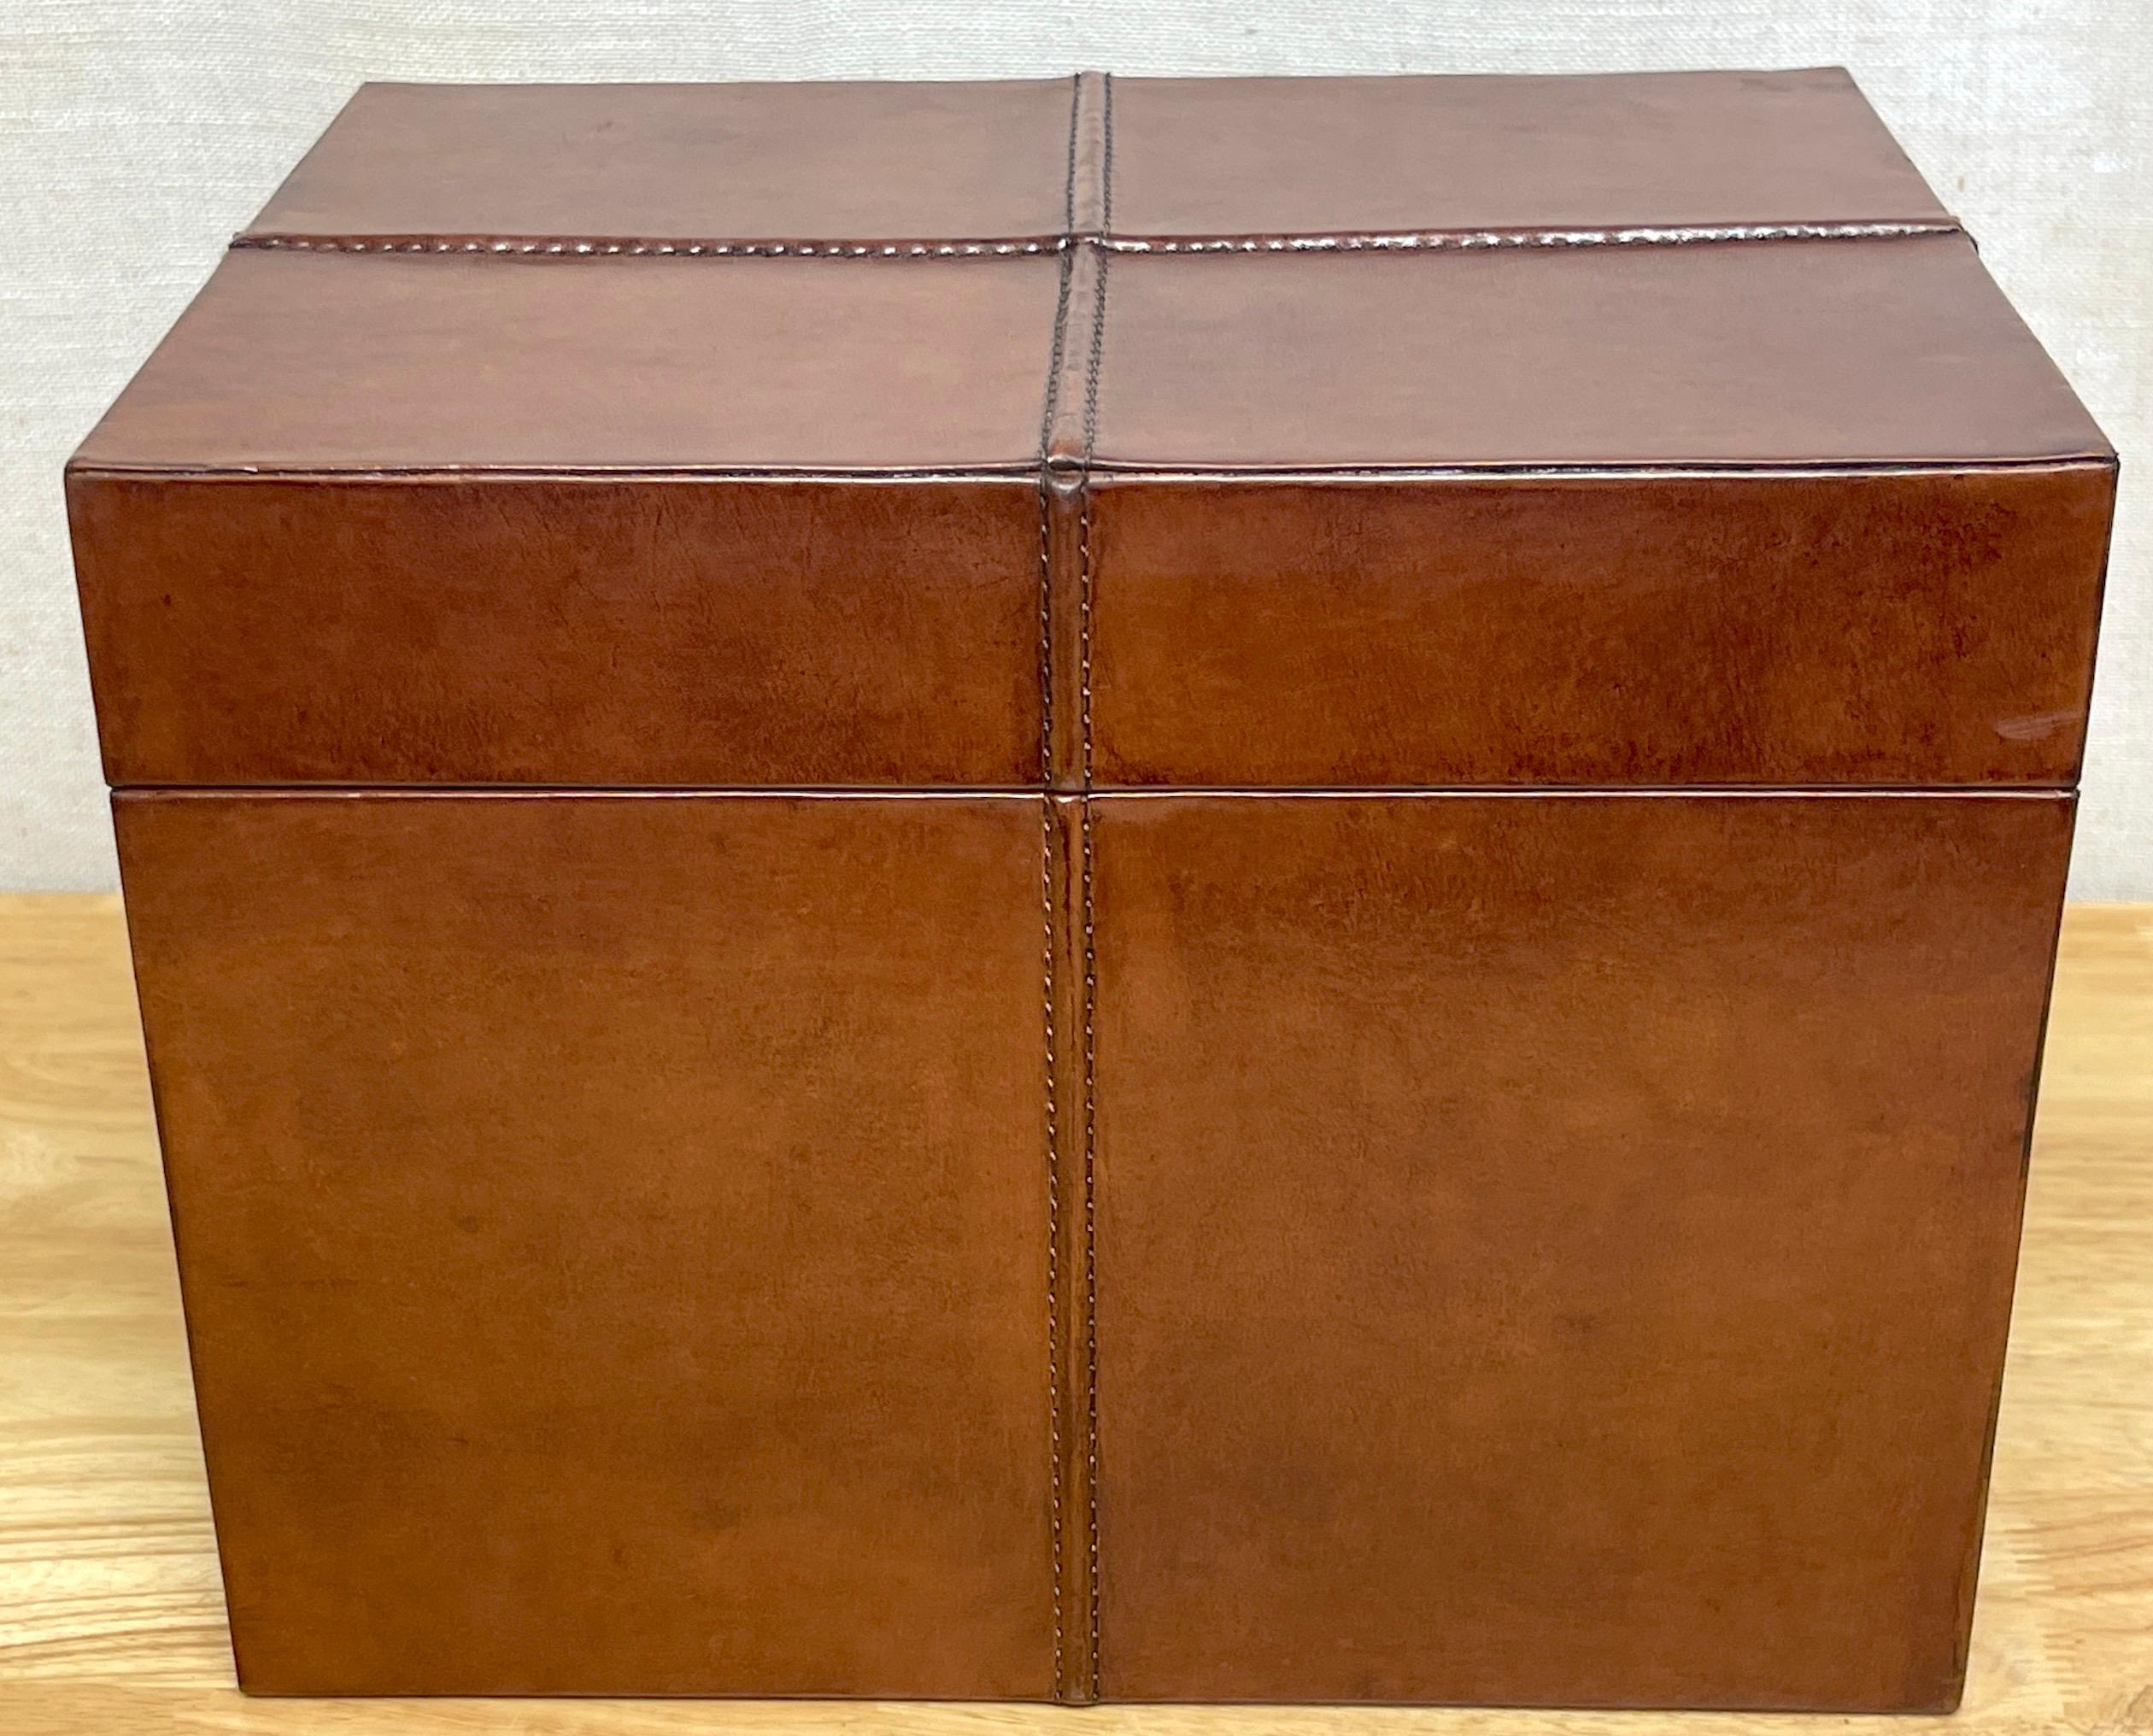 French Modern Stitched leather Rectangular table box 
France, later 20th century 
French modern leather table box, reminiscent of Jacques Adnet works. This stately rectangular box is hand stitched leather, of good size with stitched Quatrefoil